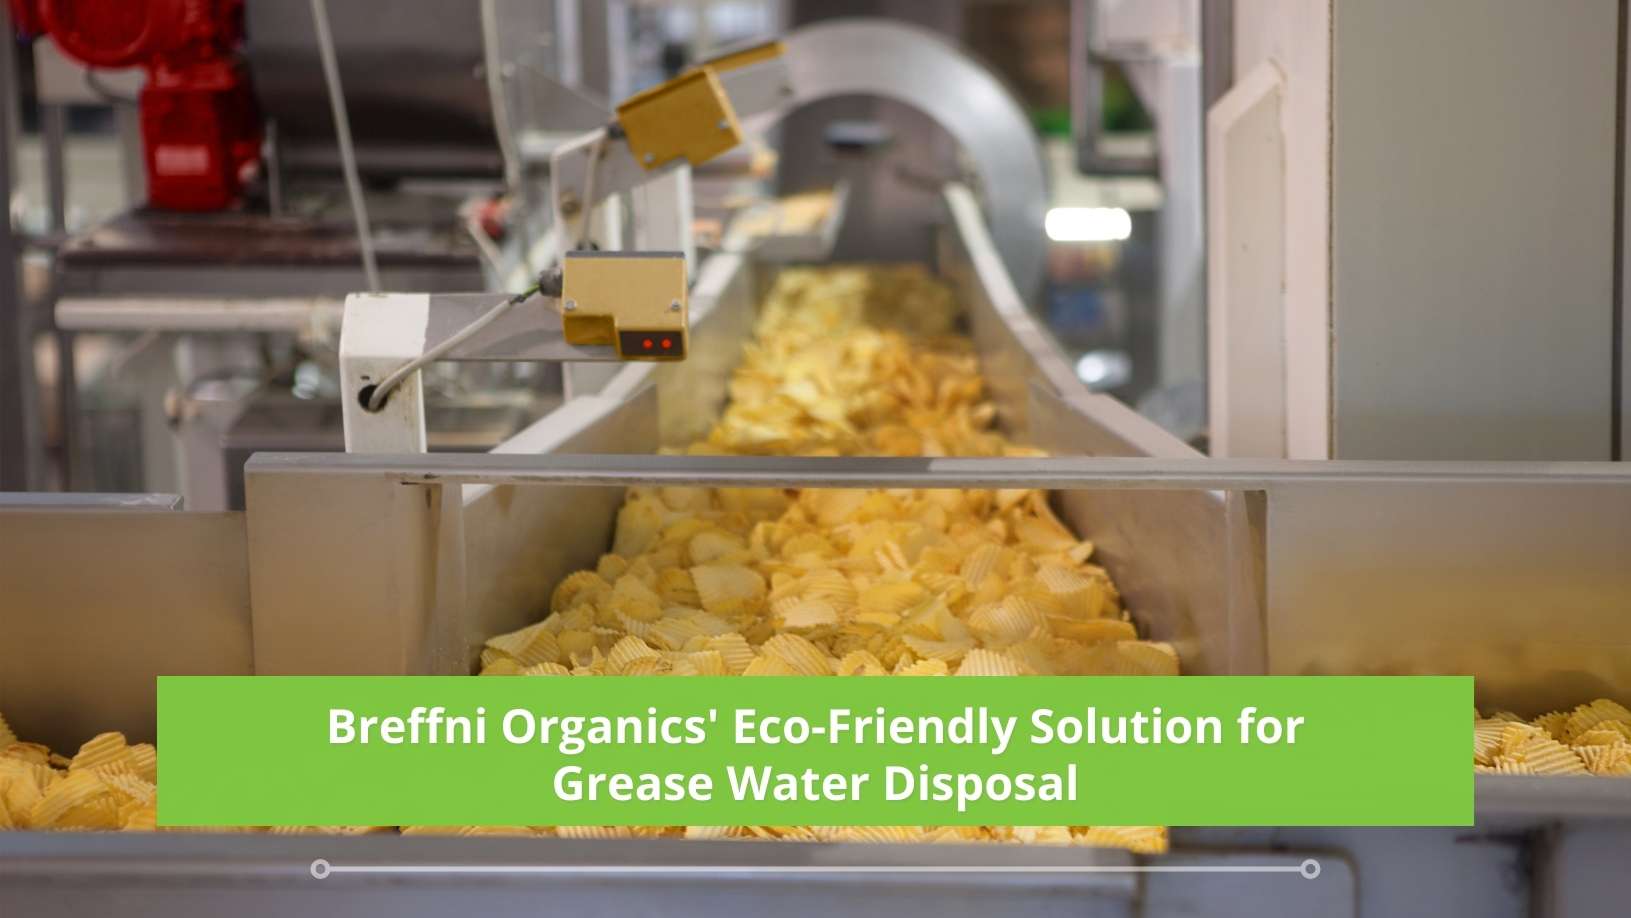 Breffni Organics' Eco-Friendly Solution for Grease Water Disposal